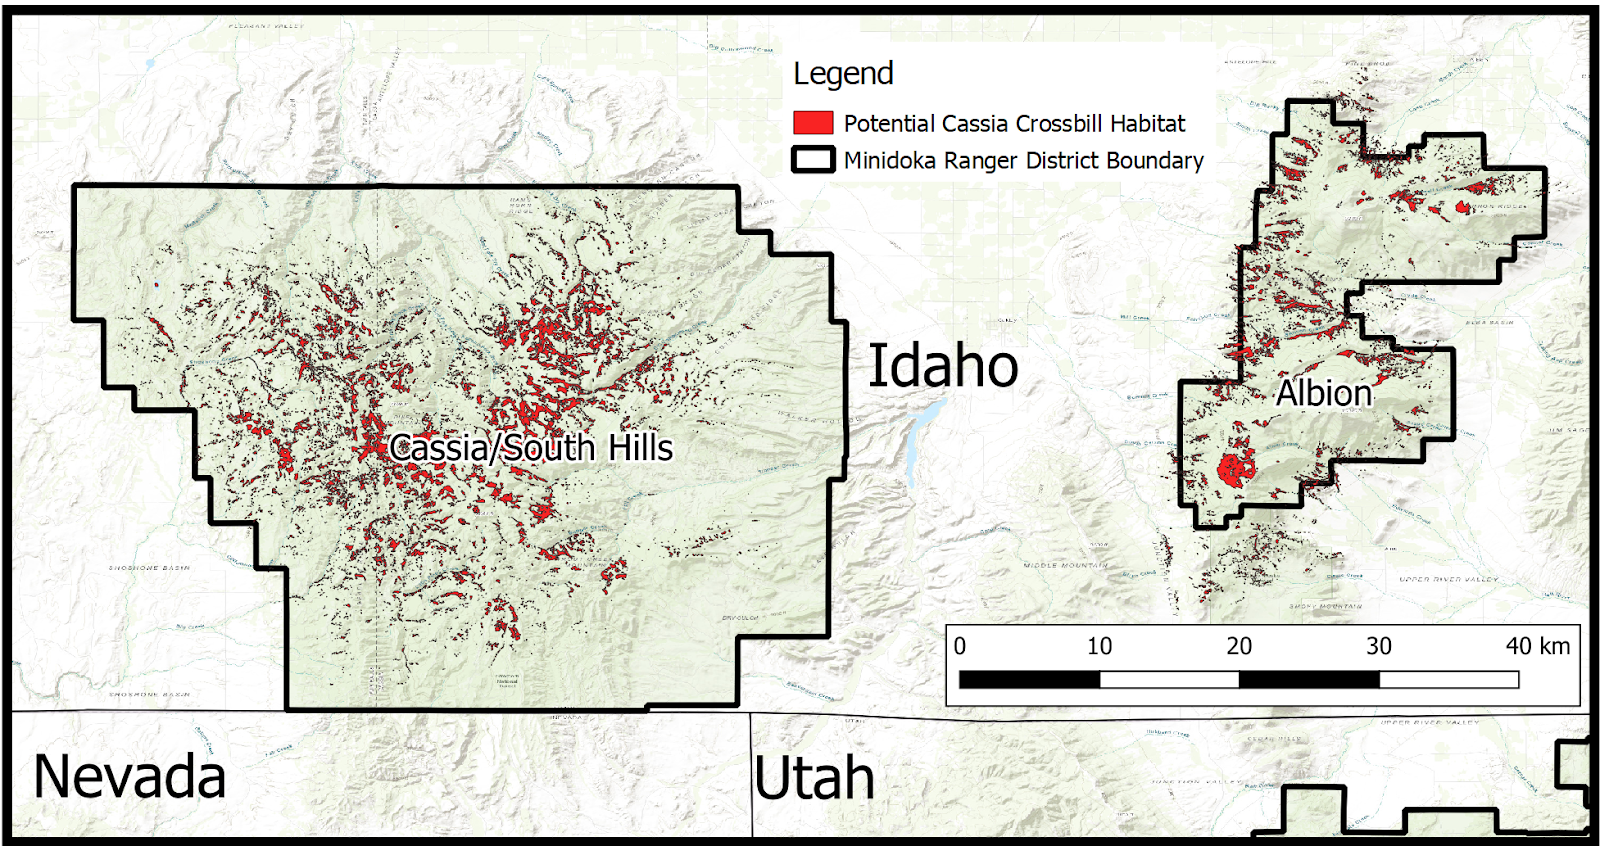 the map shows the south hills and albion mountains in southern Idaho (northern Nevada and Utah are visible at the bottom) Both mountain ranges show flecks of red indicating areas of potential crossbill habitat